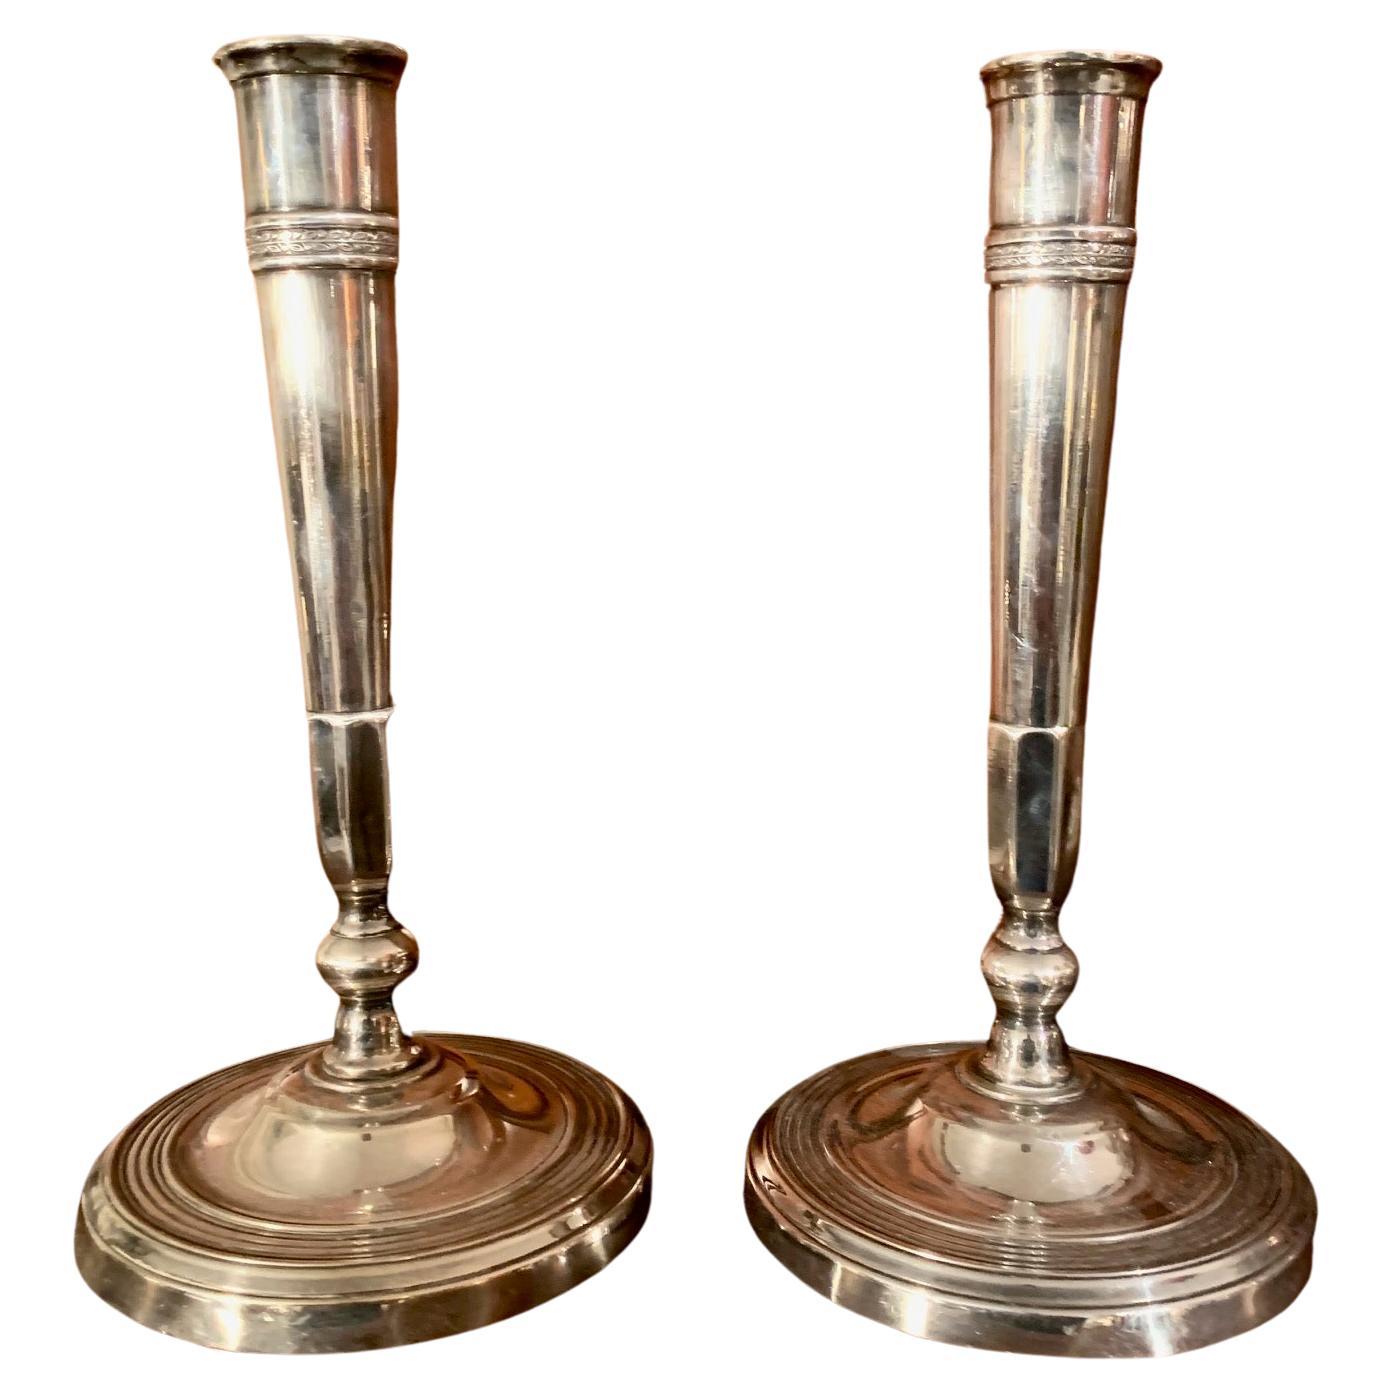 Pair of French Directory period candlesticks, early 19th century, in silver bronze with base decoration with concentric arches, upper part decorated with a small filigree of plant motifs.